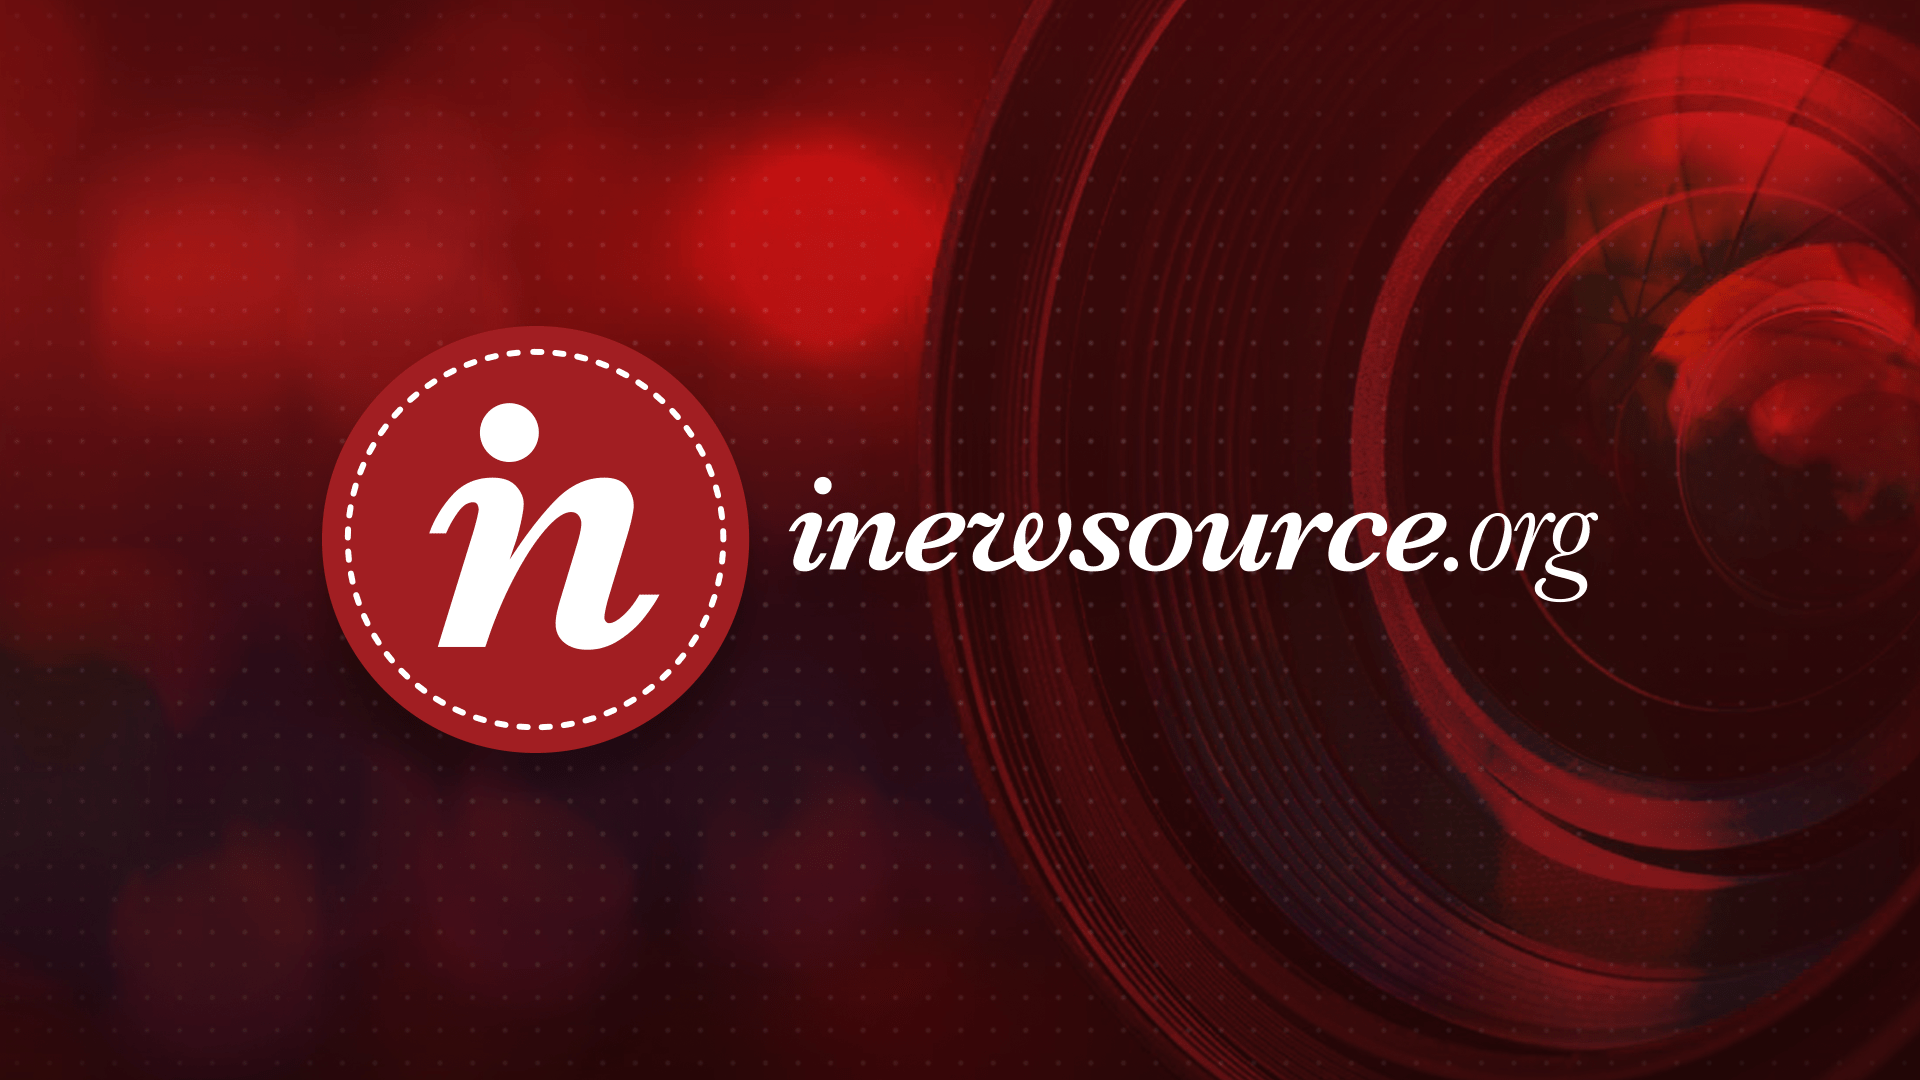 inewsource is a nonprofit, nonpartisan newsroom in San Diego committed to exposing wrongdoing and holding powerful people and institutions accountable.